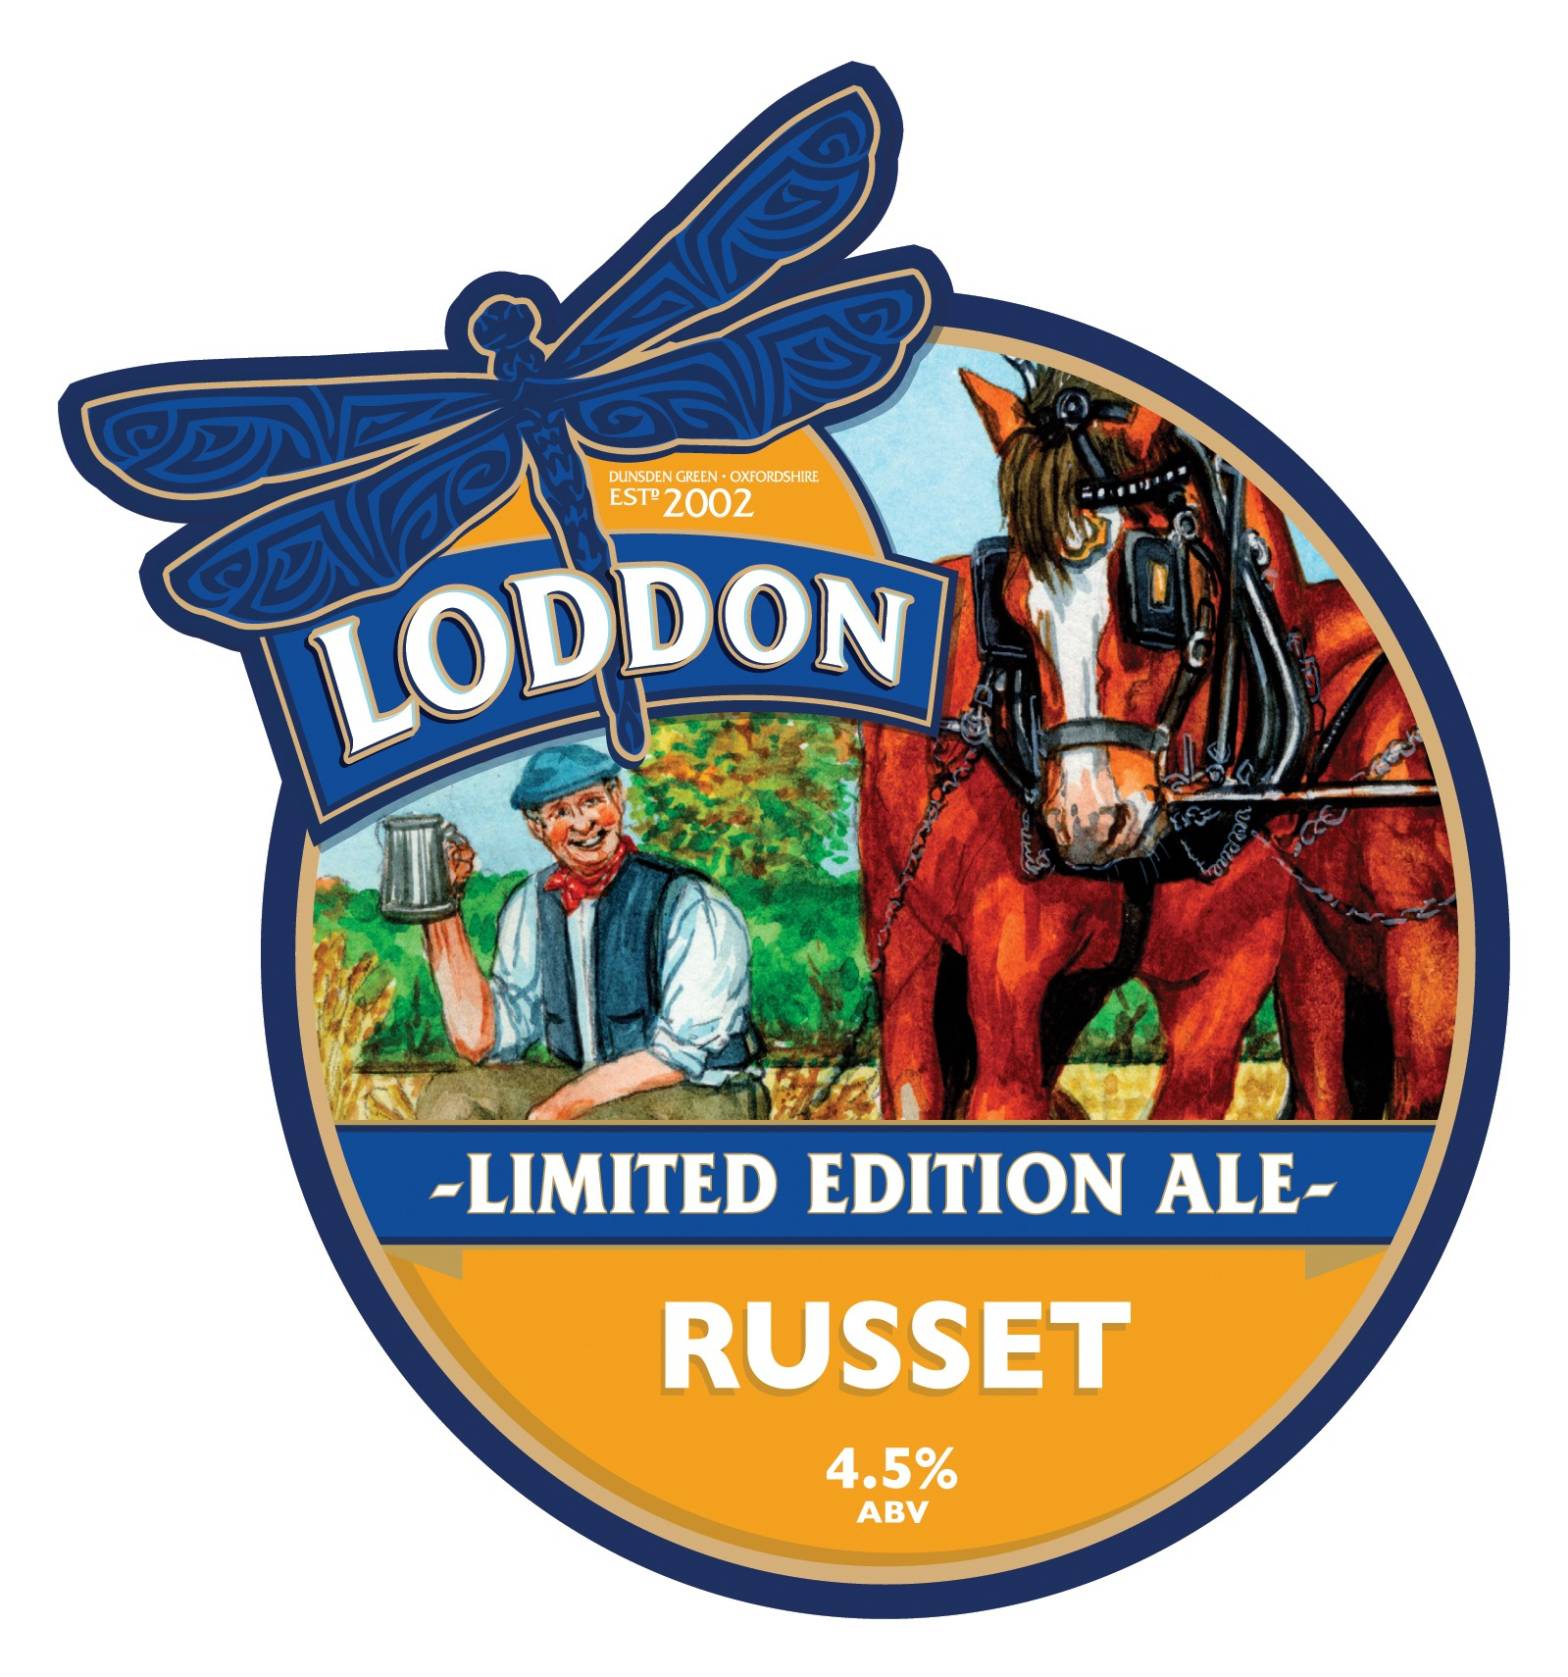 Loddon Brewery Limited Edition Ale - Russet